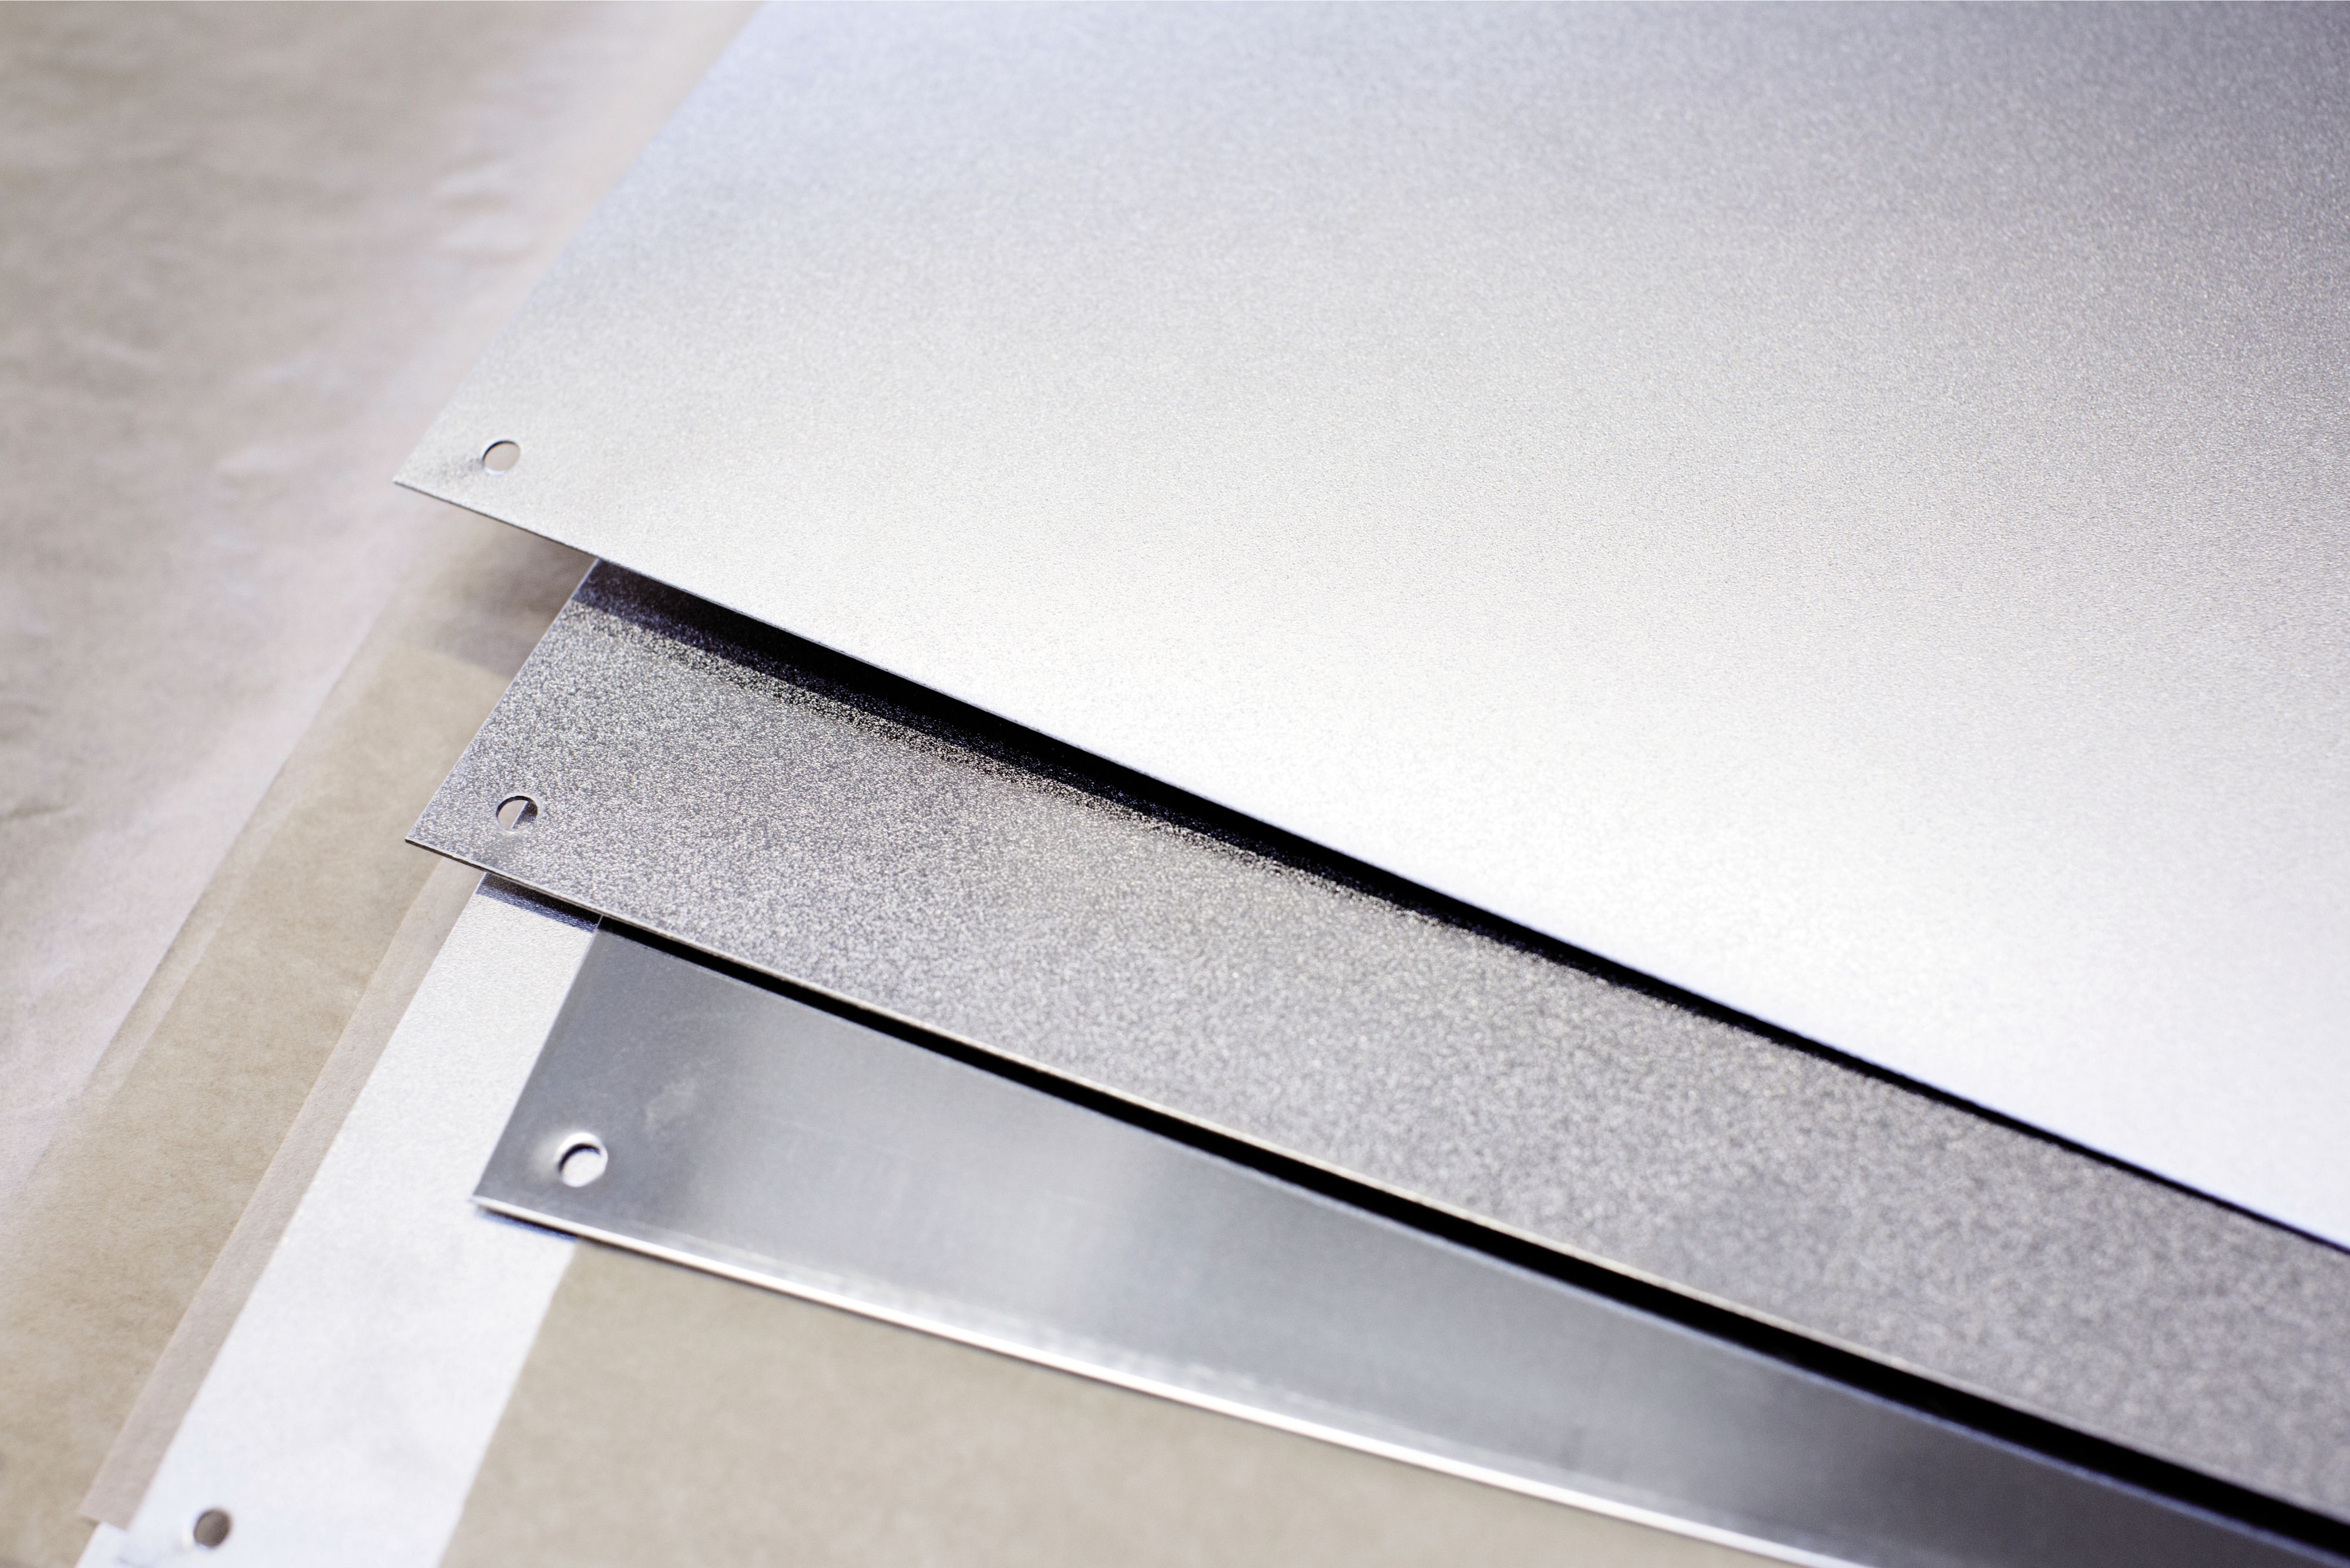 Three stainless steel surfaces in comparison